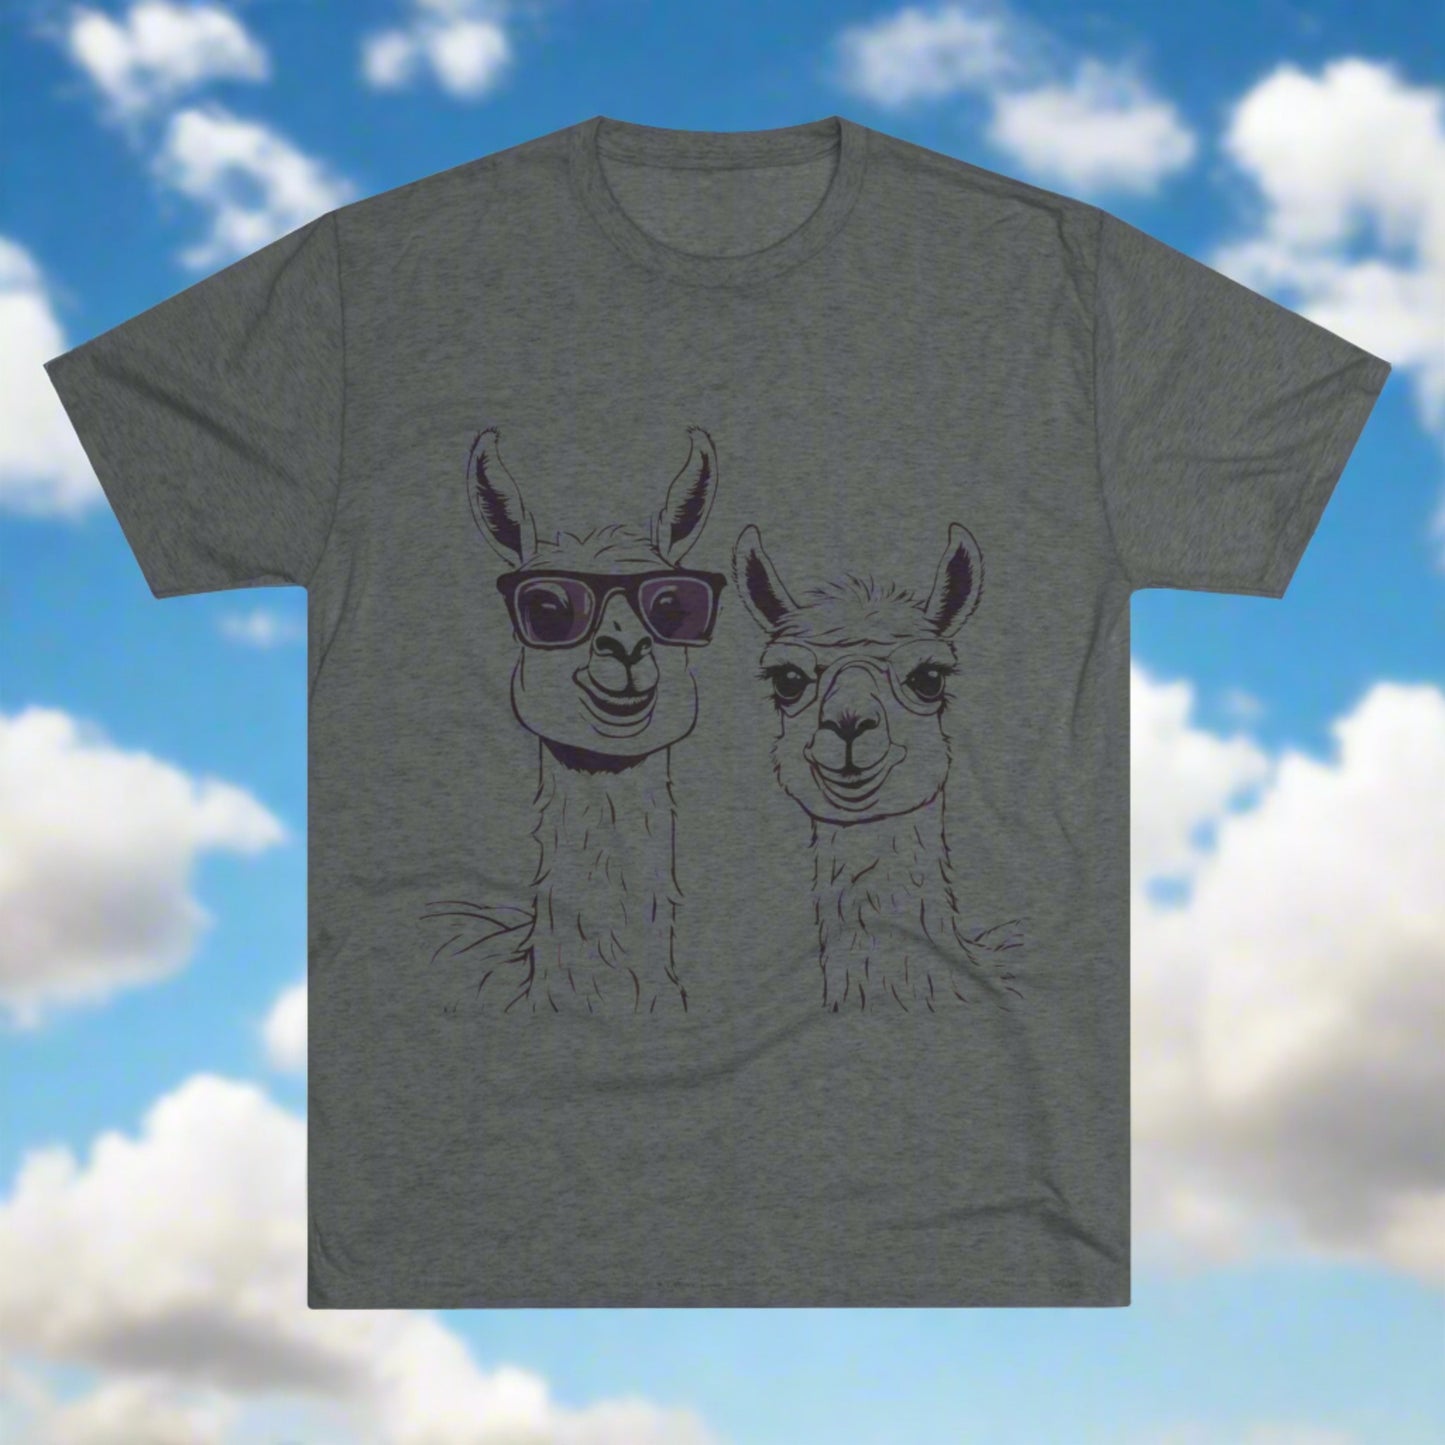 A gray Llamas - Tri-Blend Crew Tee - Unisex Fit from Printify featuring a minimalist drawing of two llamas. The llama on the left sports large sunglasses, while the llama on the right has a relaxed expression. Both llamas are outlined in a dark, subtle color. Perfect for fans of llama love and casual wear!